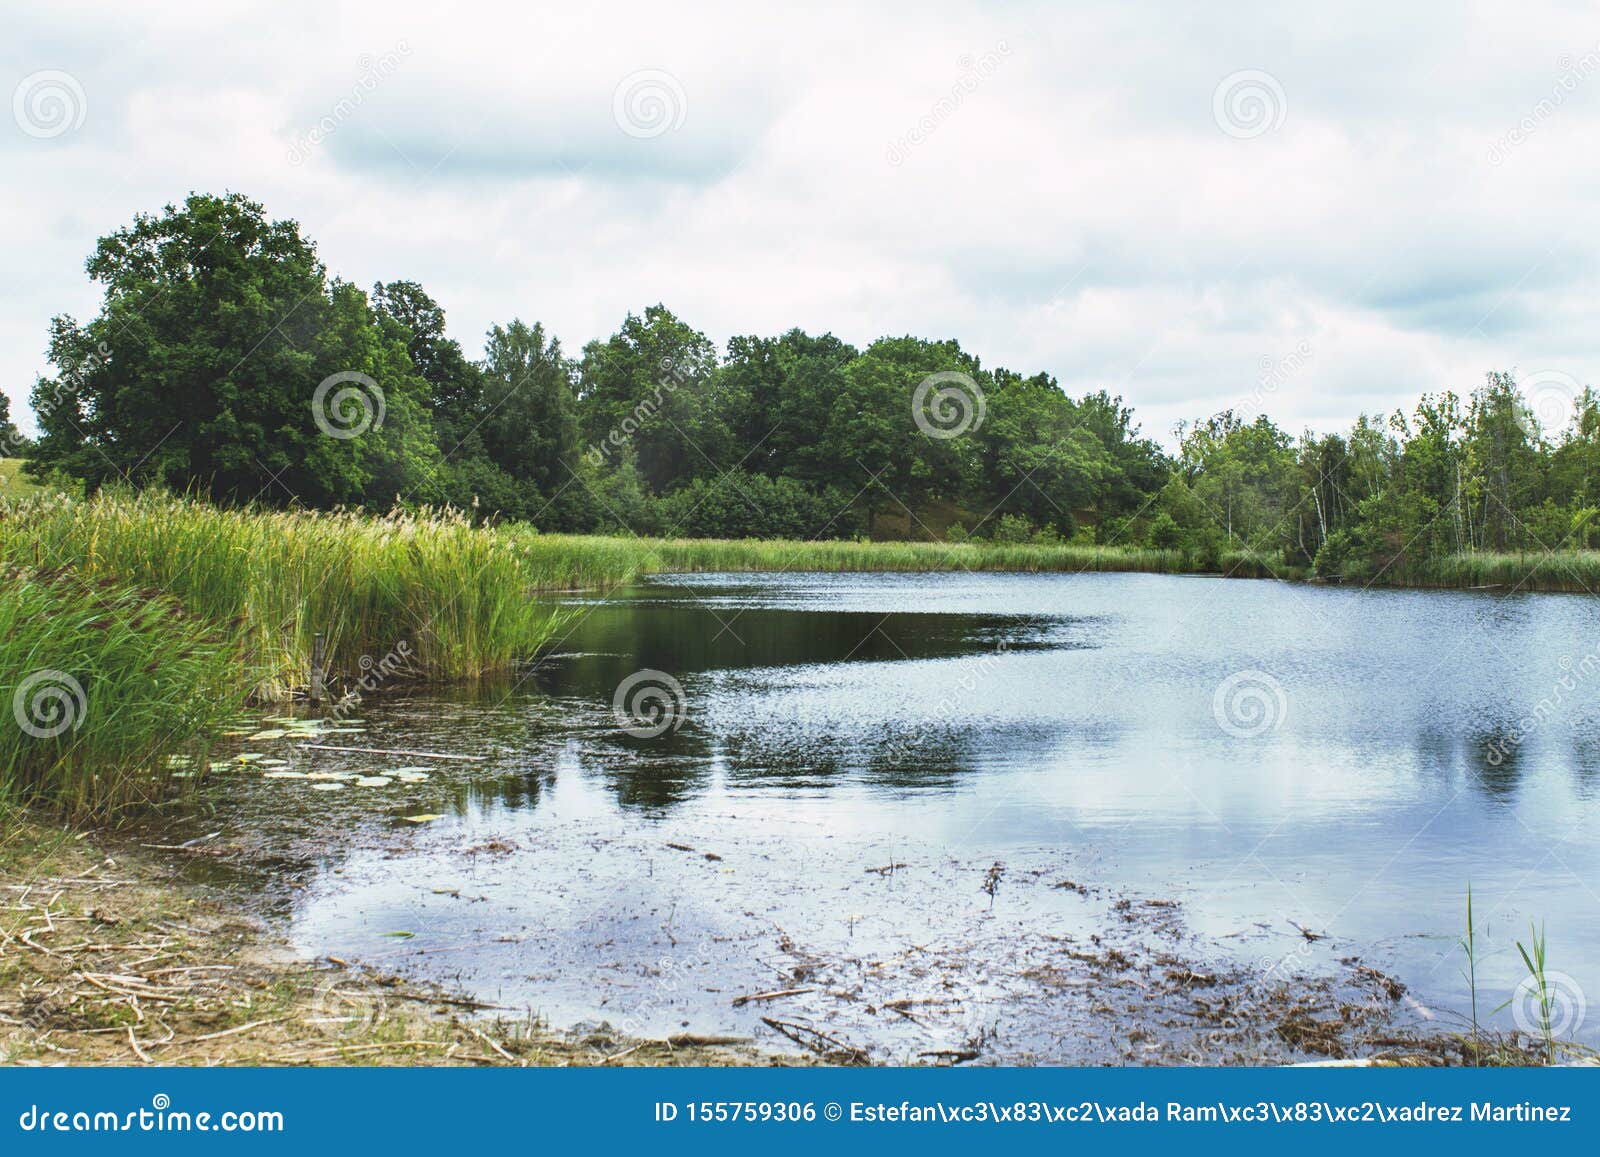 romantic landscape of photography of forest and lake in skovde sweden.